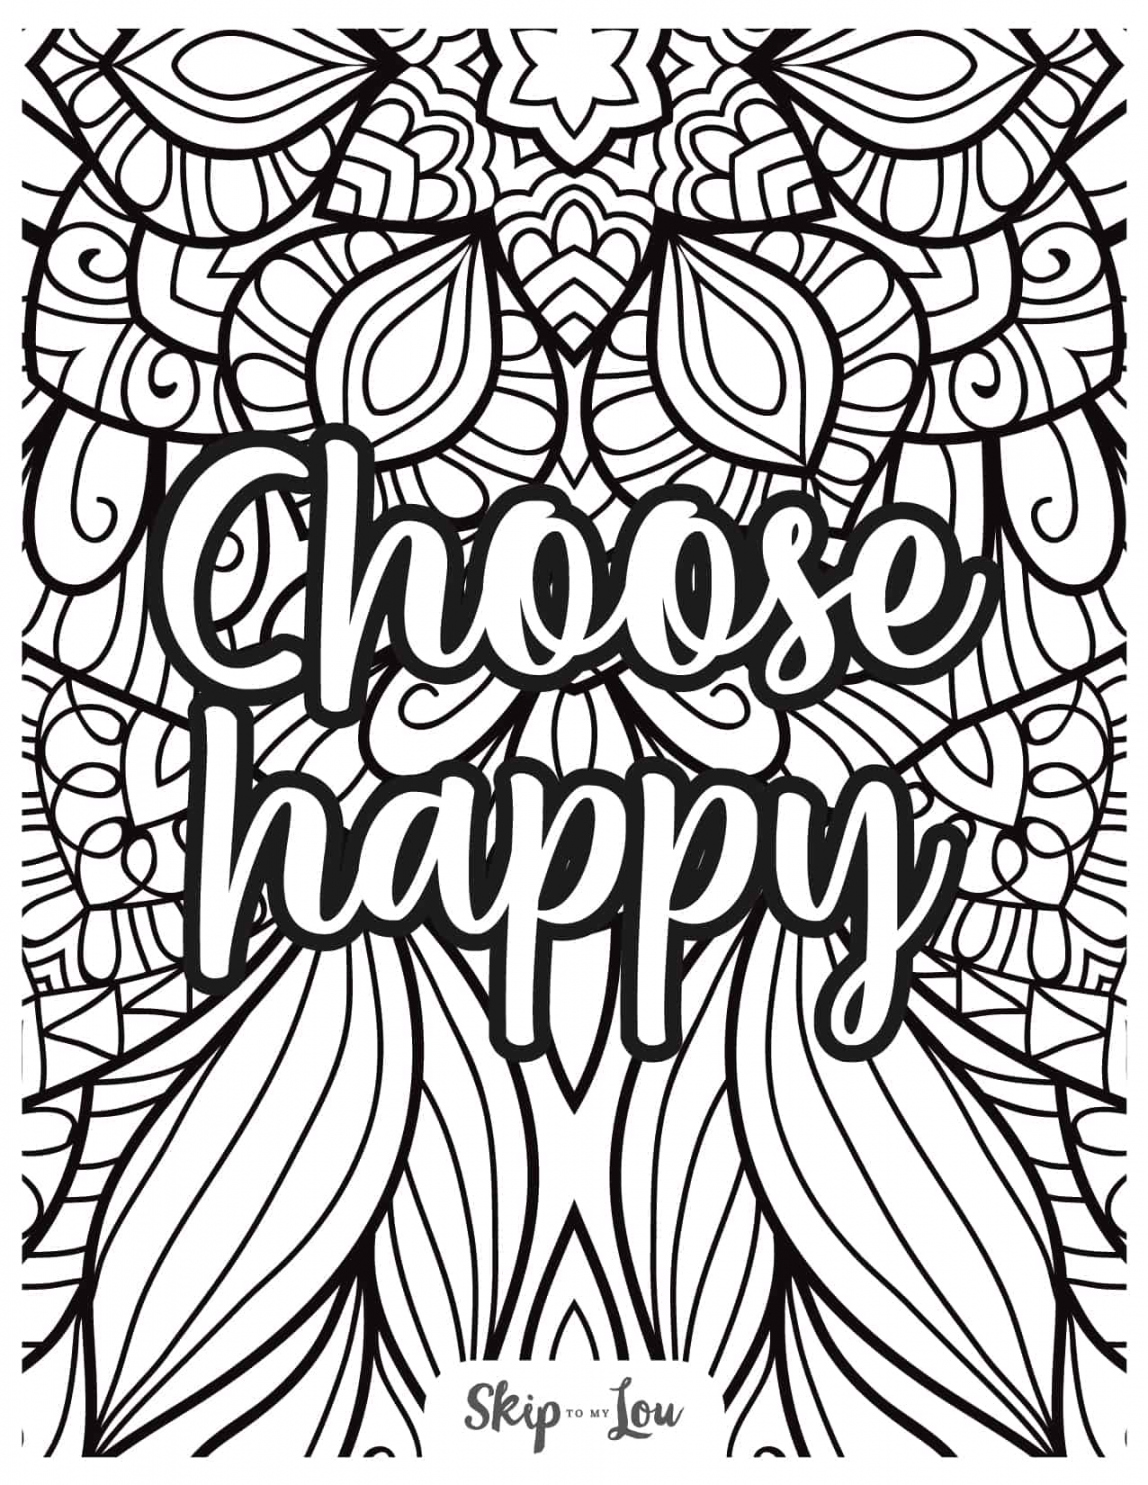 Free Coloring Sheets Printable - Printable - Free Coloring Pages For Adults  Skip To My Lou